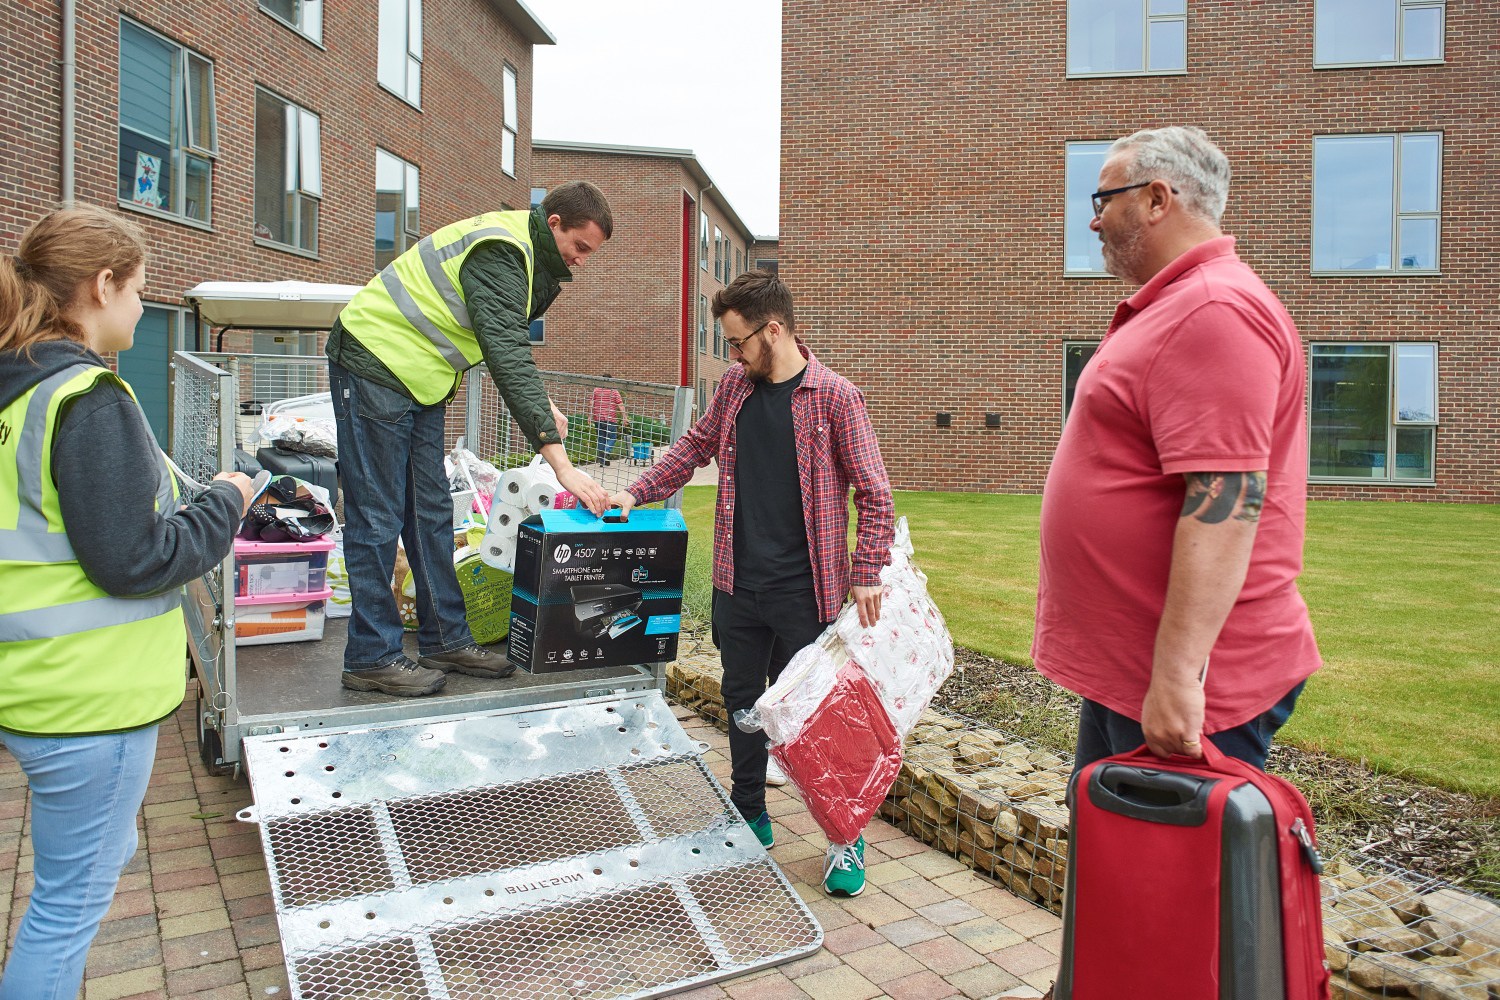 A member of staff assists a student as his possessions are lifted from a trailer.